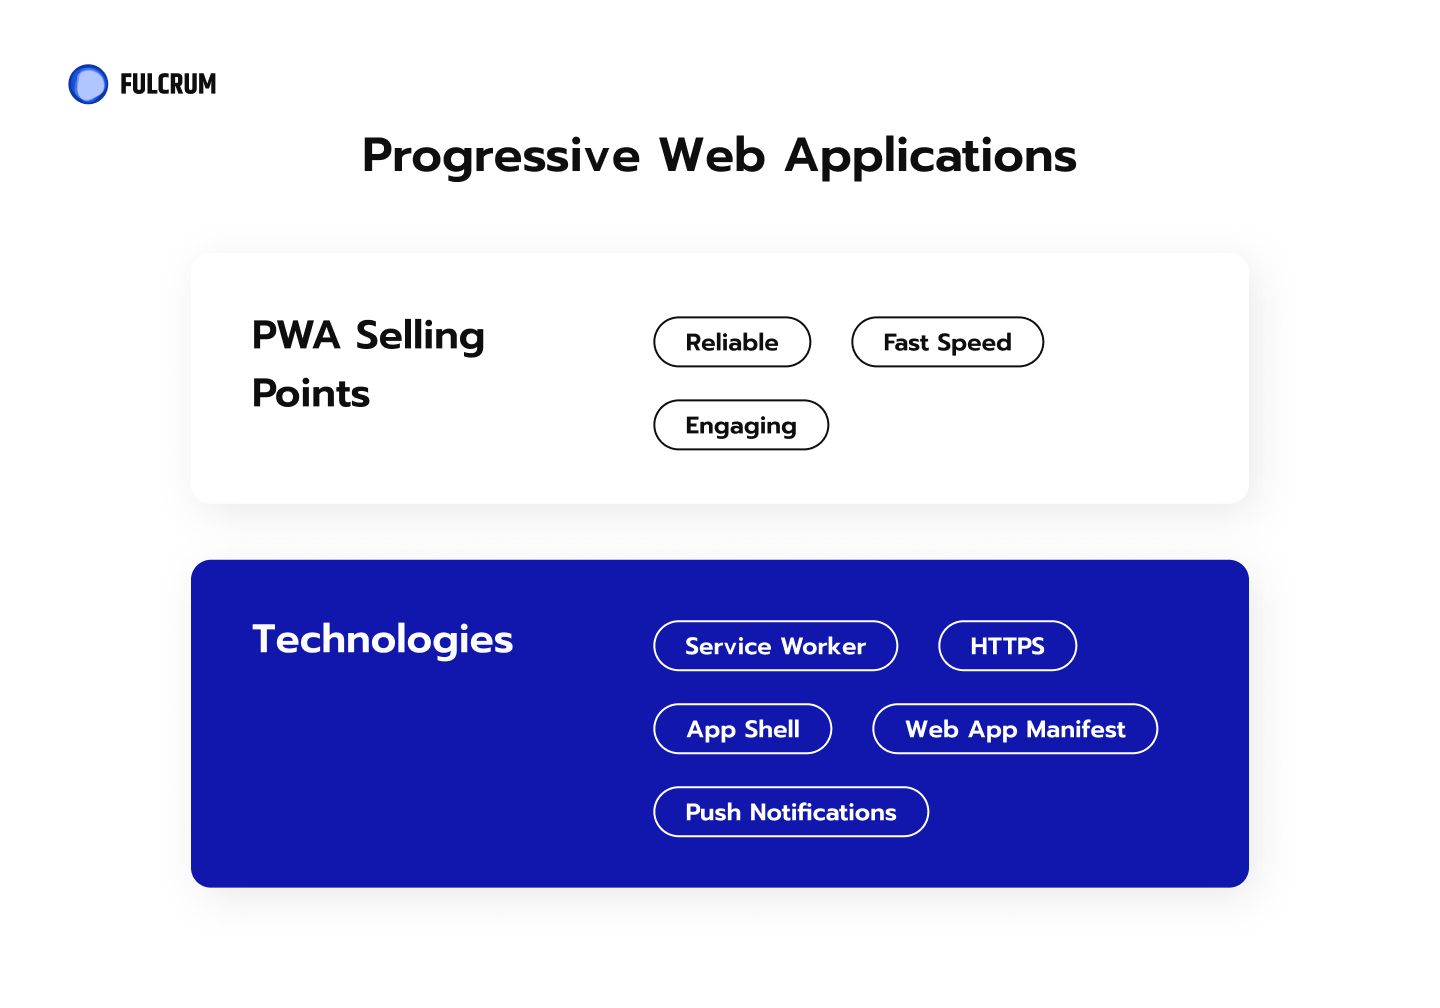 OLX Aims To Solidify Its Number One Position With PWA